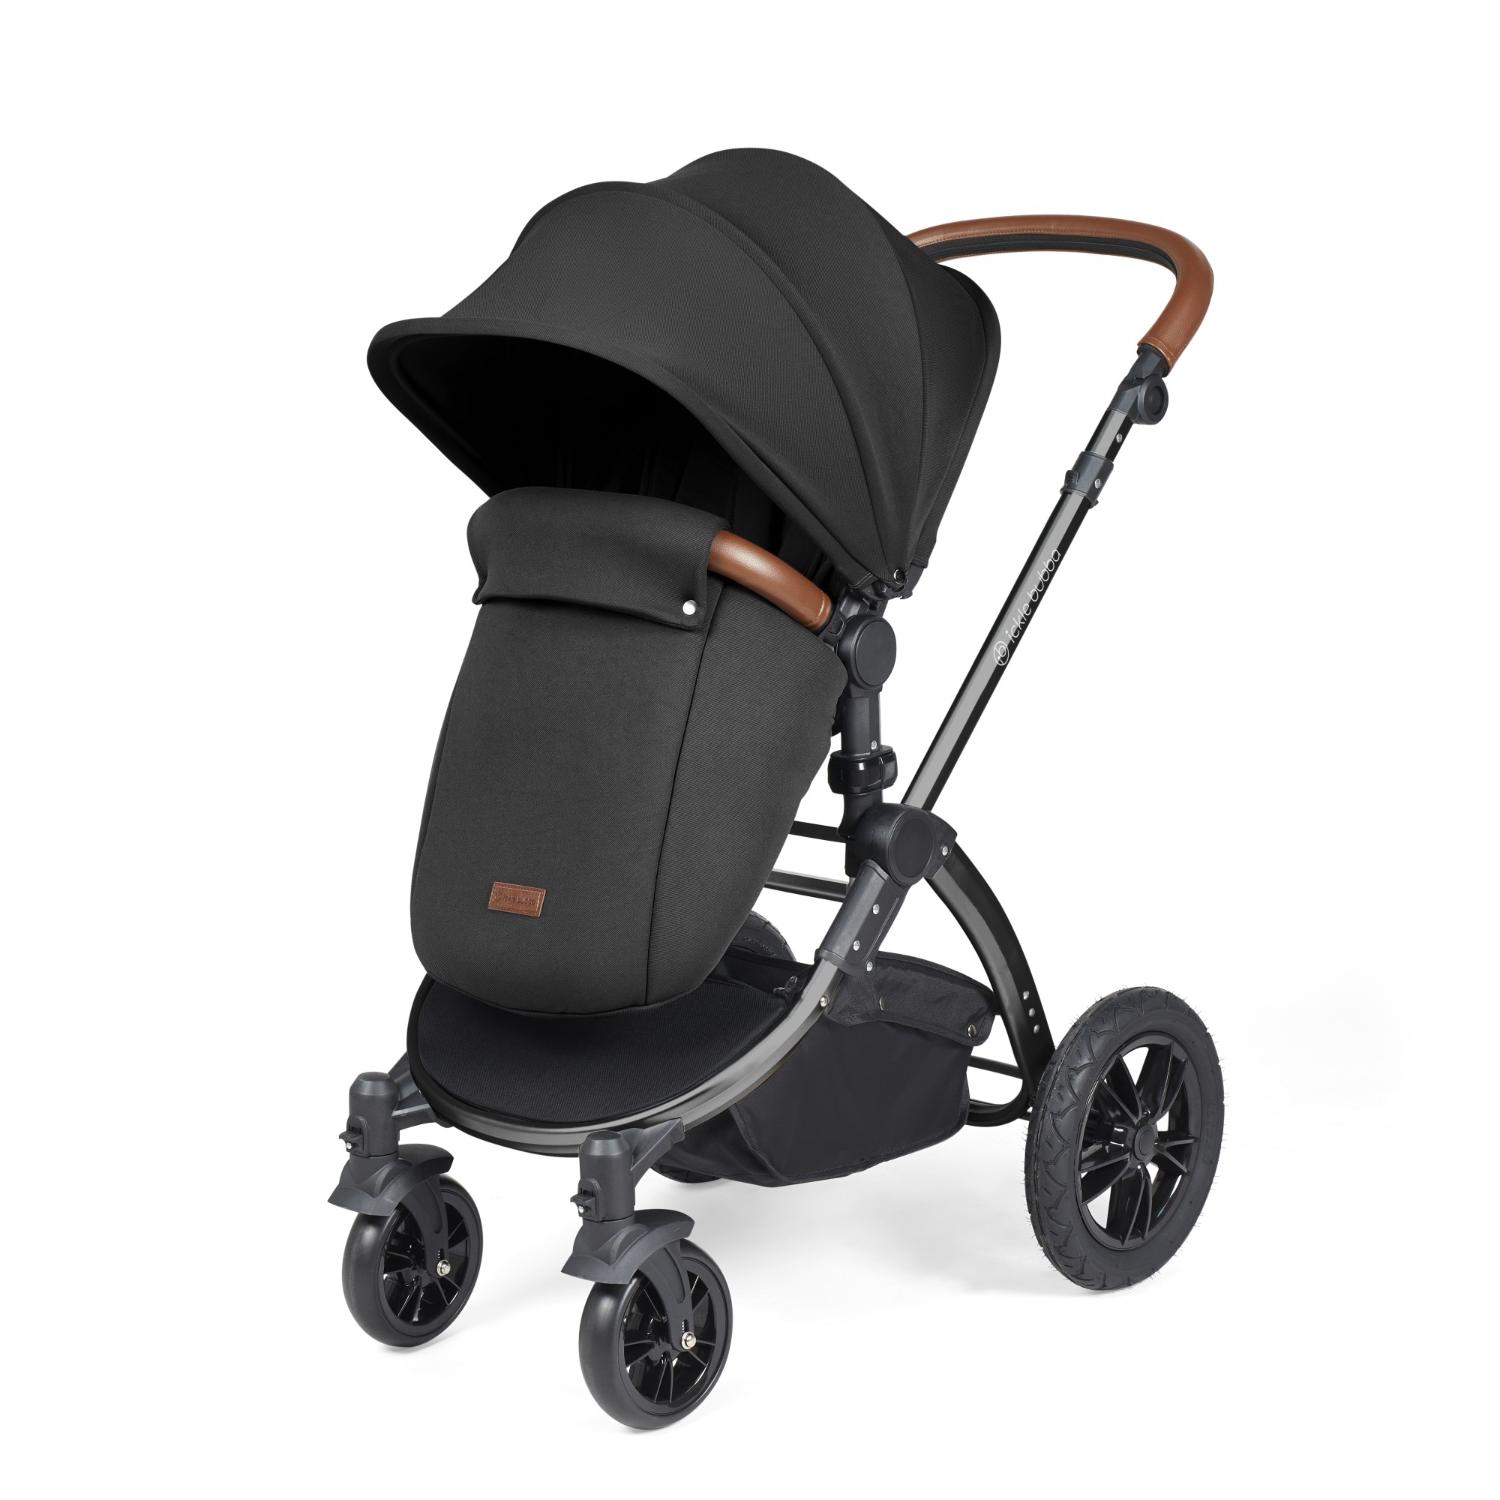 Ickle Bubba Stomp Luxe Pushchair with foot warmer attached in Midnight black colour with tan handle